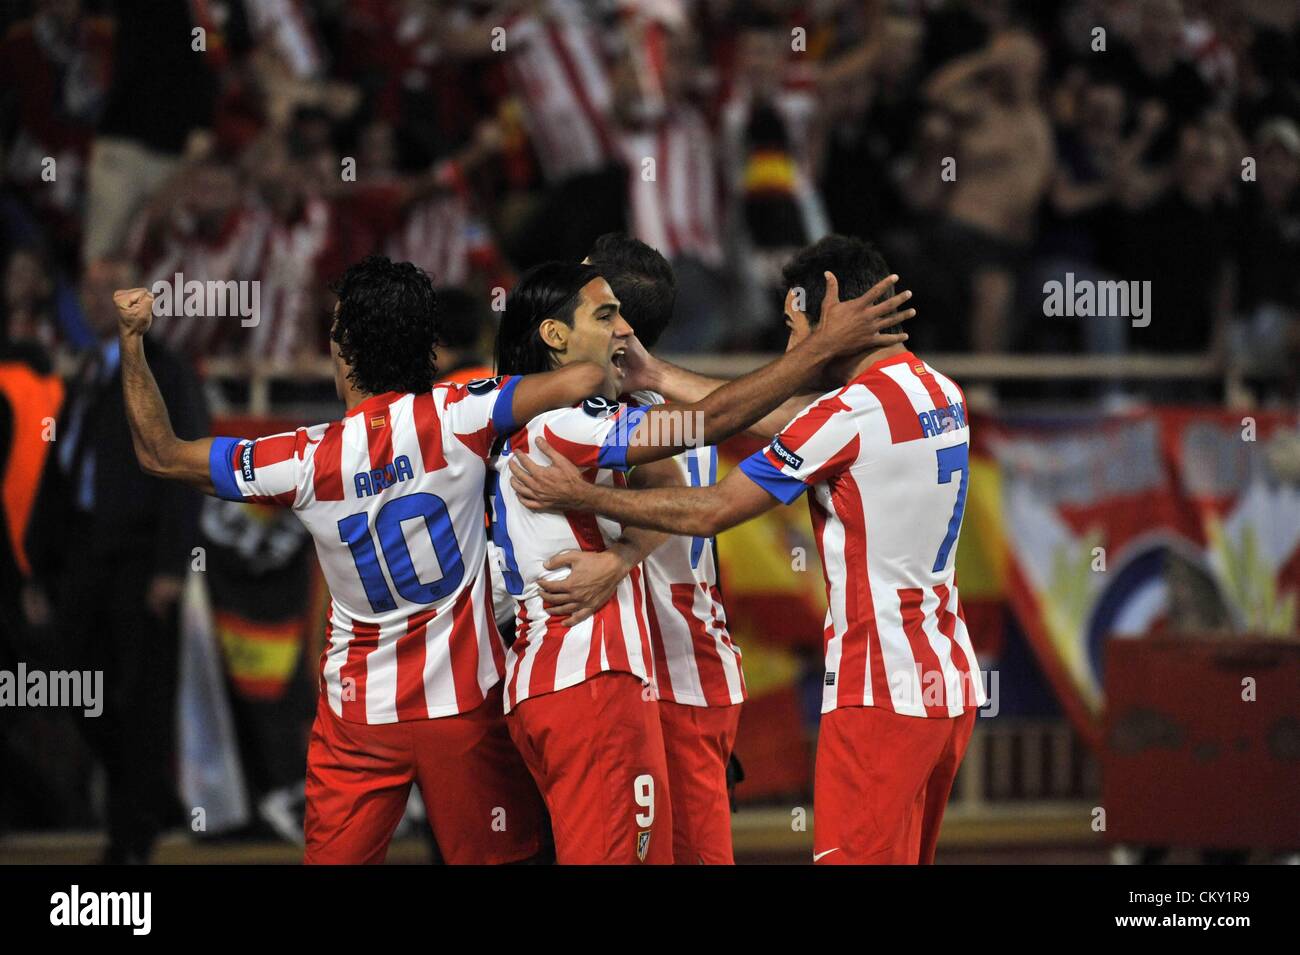 31.08.2012. Monaco, France. Atletico Madrid celebrate winning the Super  Cup. Chelsea FC versus Atletico Madrid Monaco Atletico raced past Chelsea  and won the cup by a score of 4-1 Stock Photo - Alamy